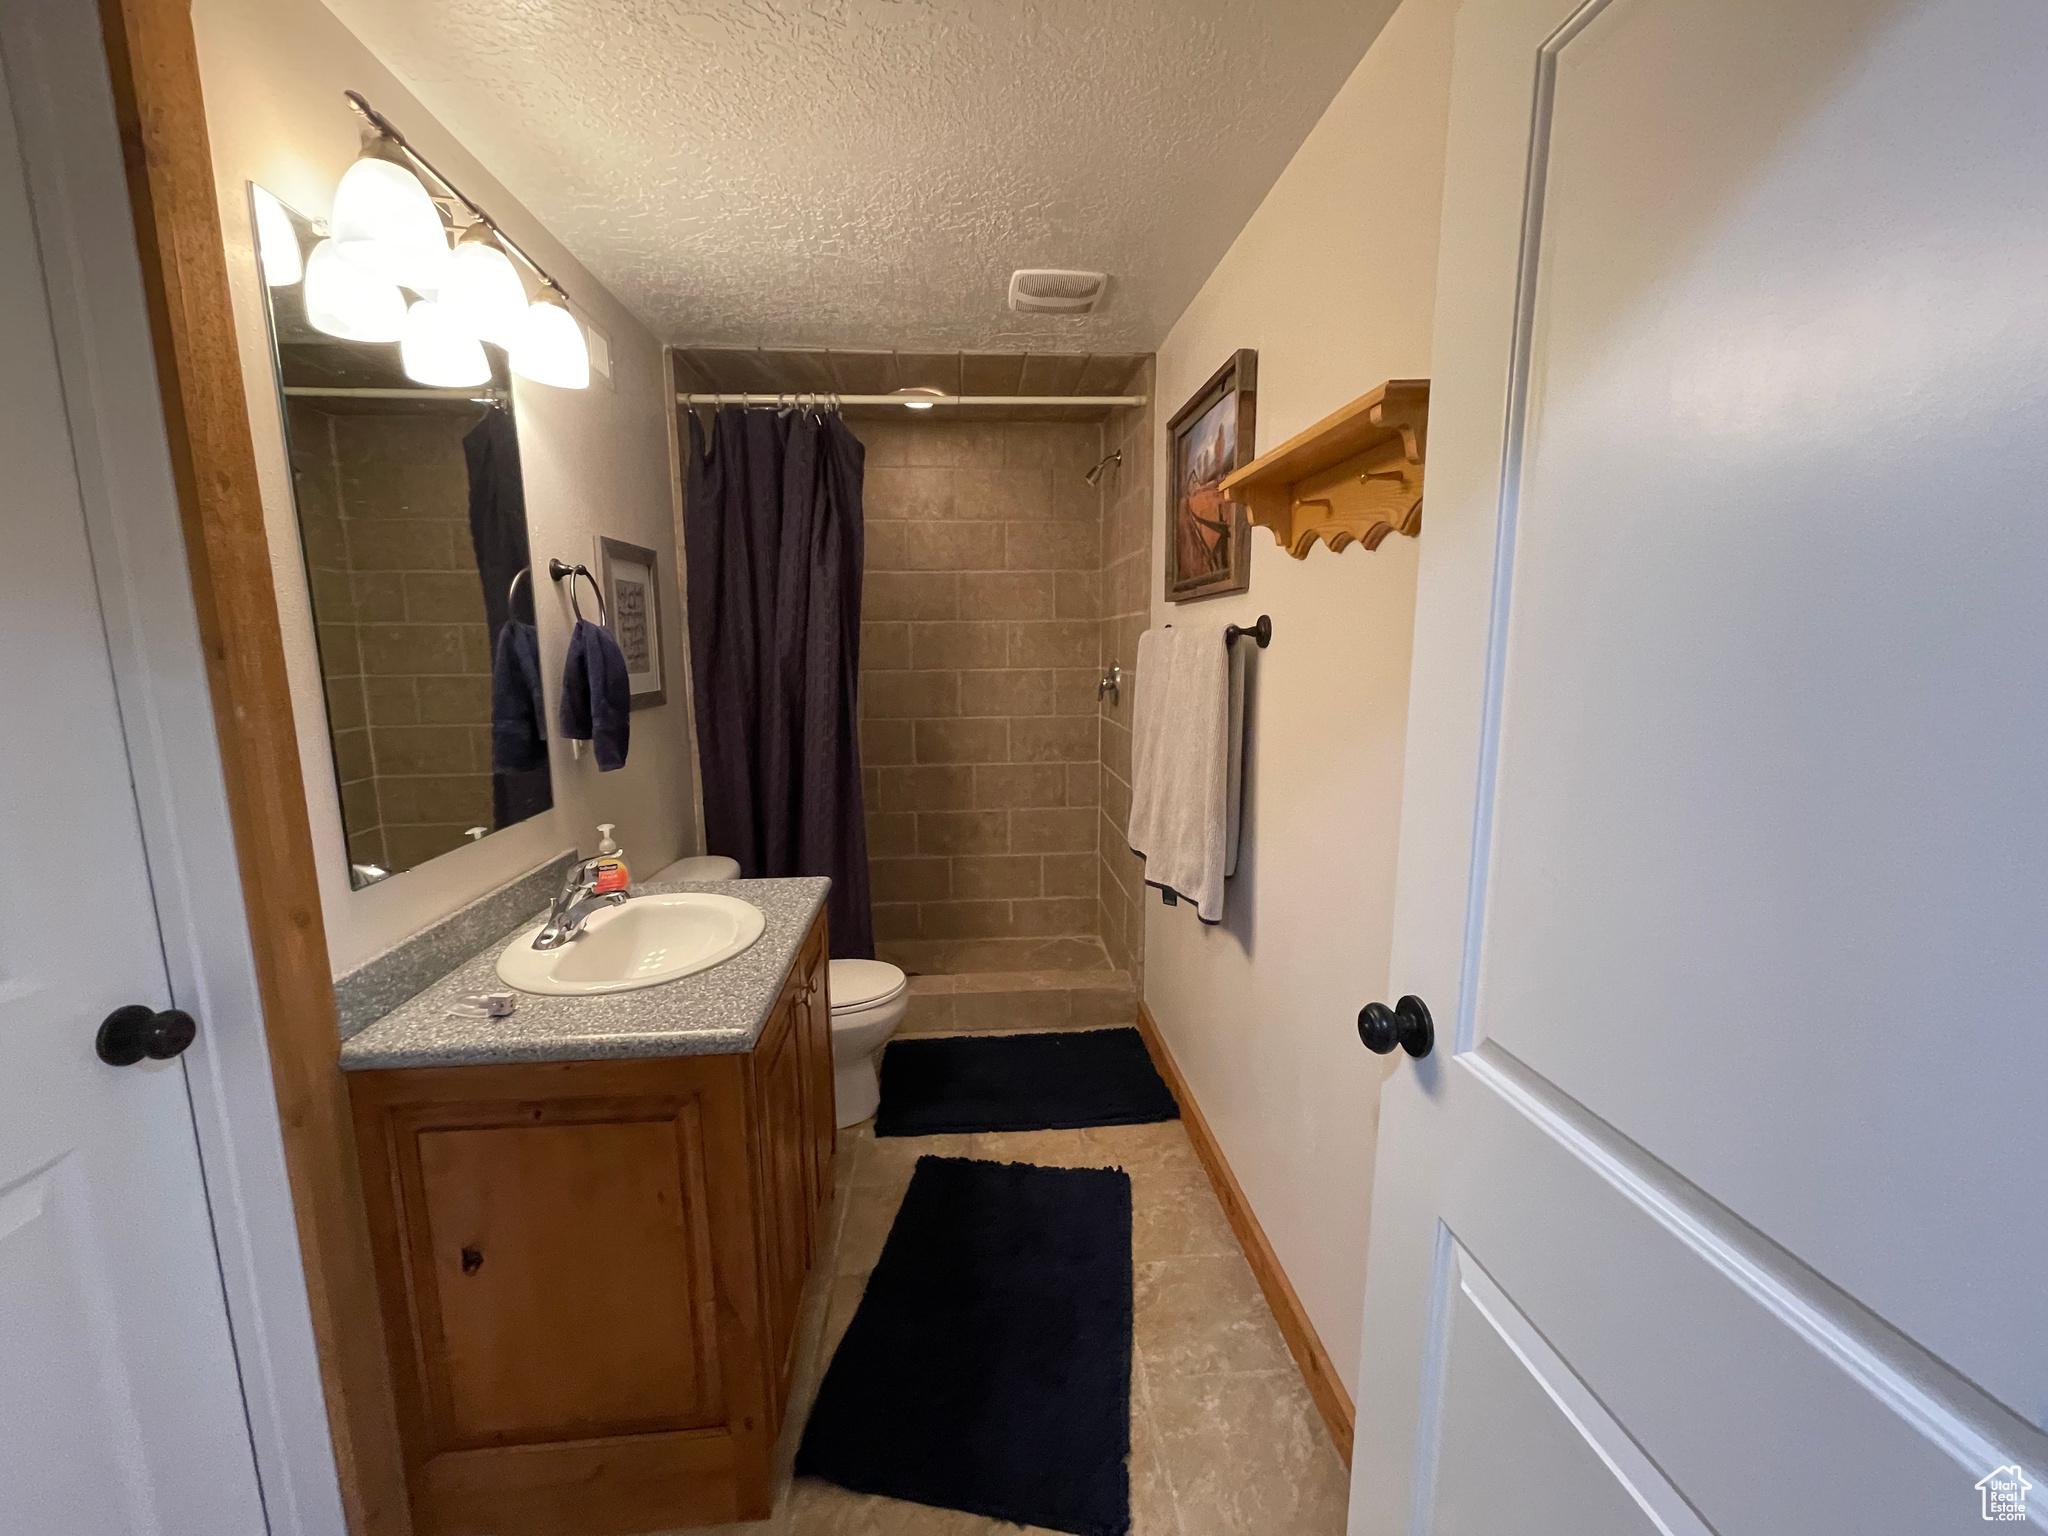 Bathroom featuring toilet, large vanity, a shower with shower curtain, tile flooring, and a textured ceiling